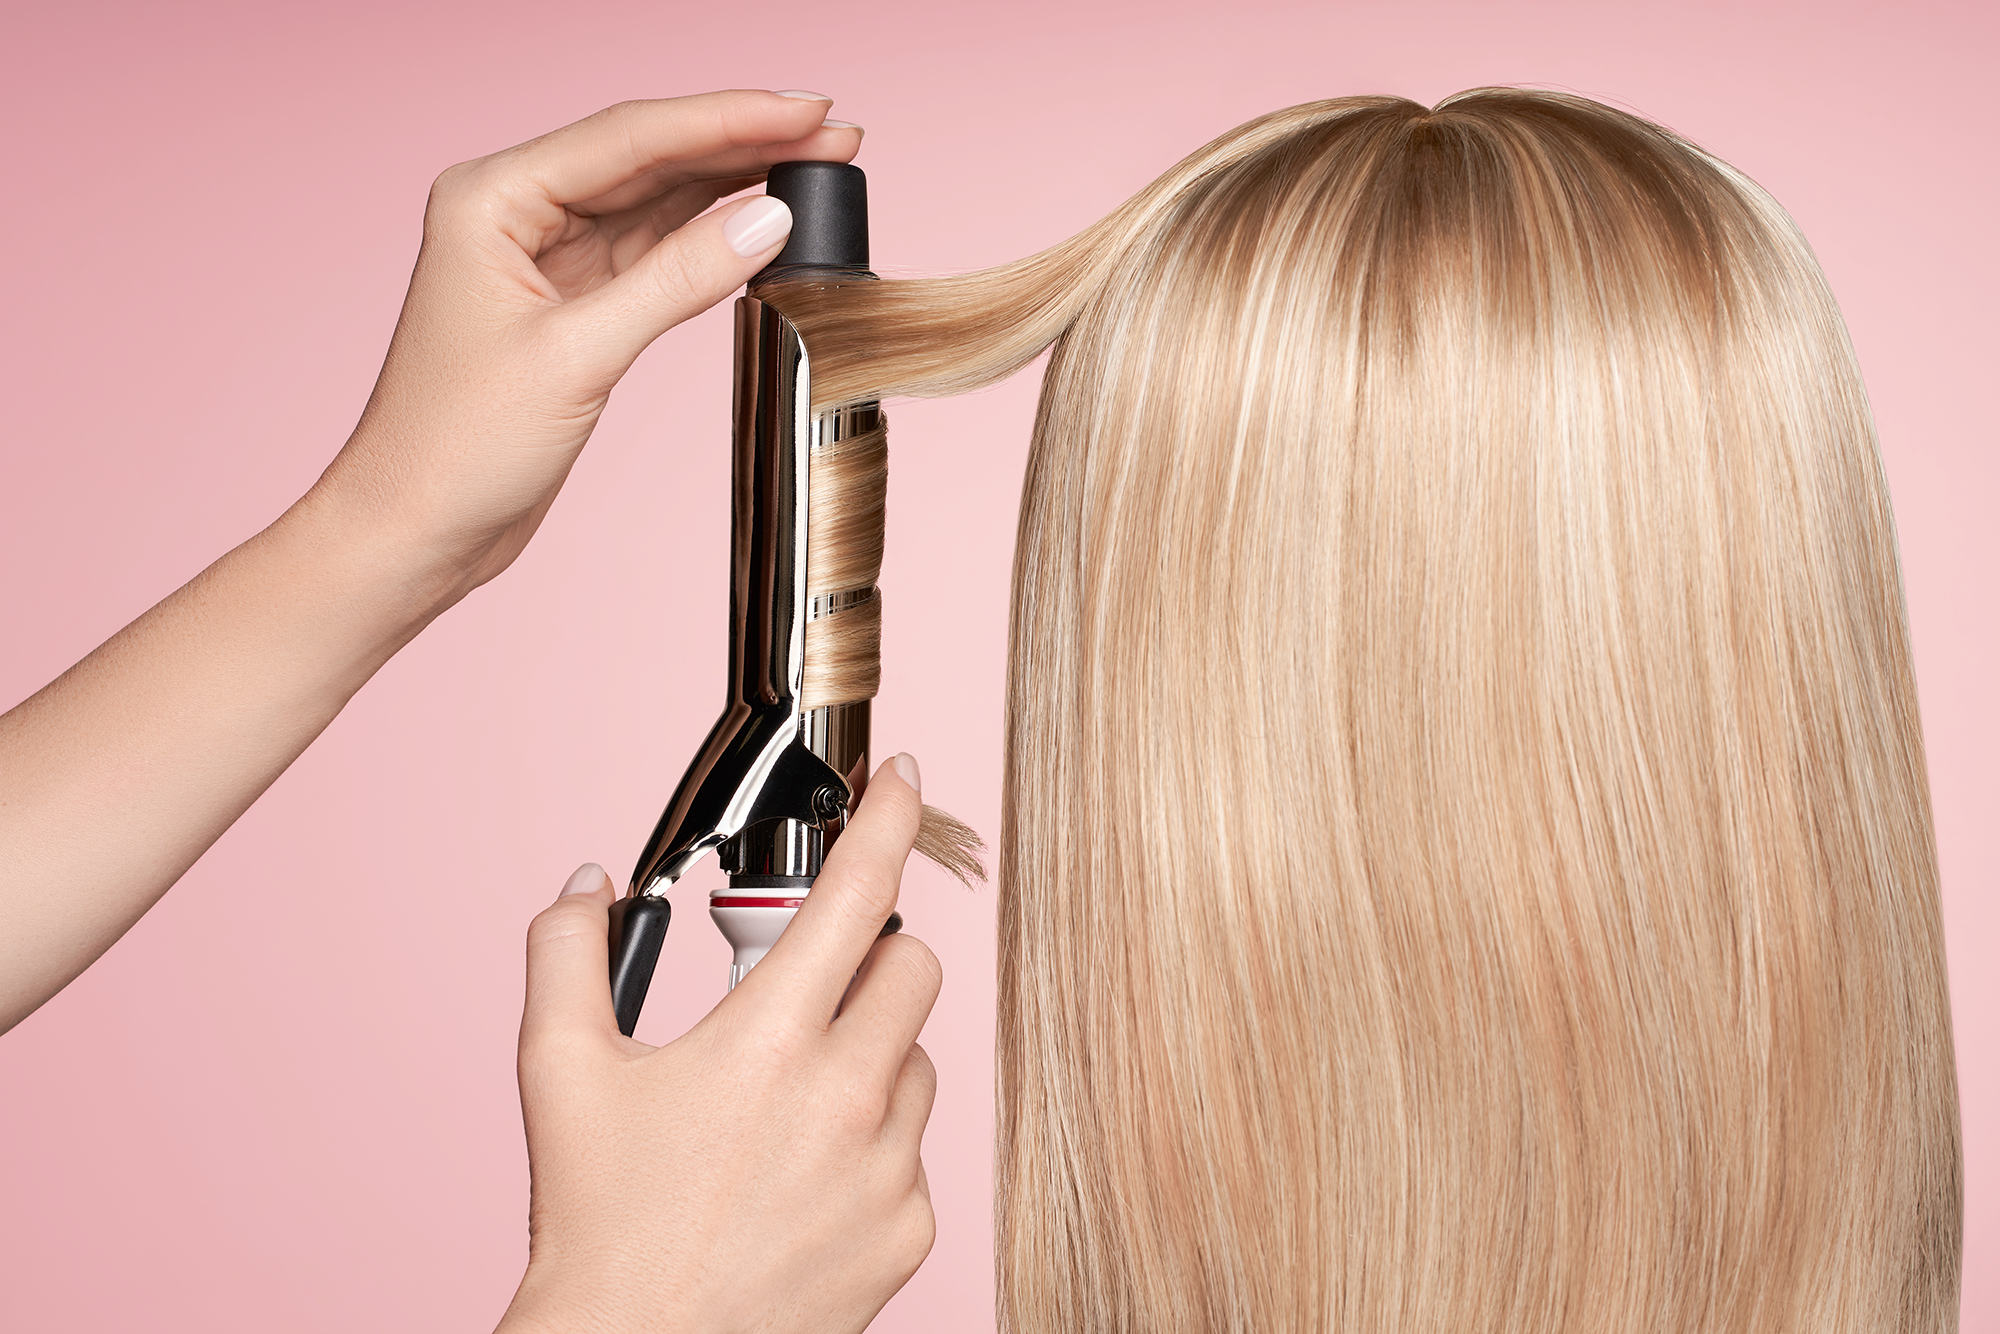 Professional Hair Crimper Crimping Hair, Styling and volumizing with  Ceramic Technology for gentle and frizz-free